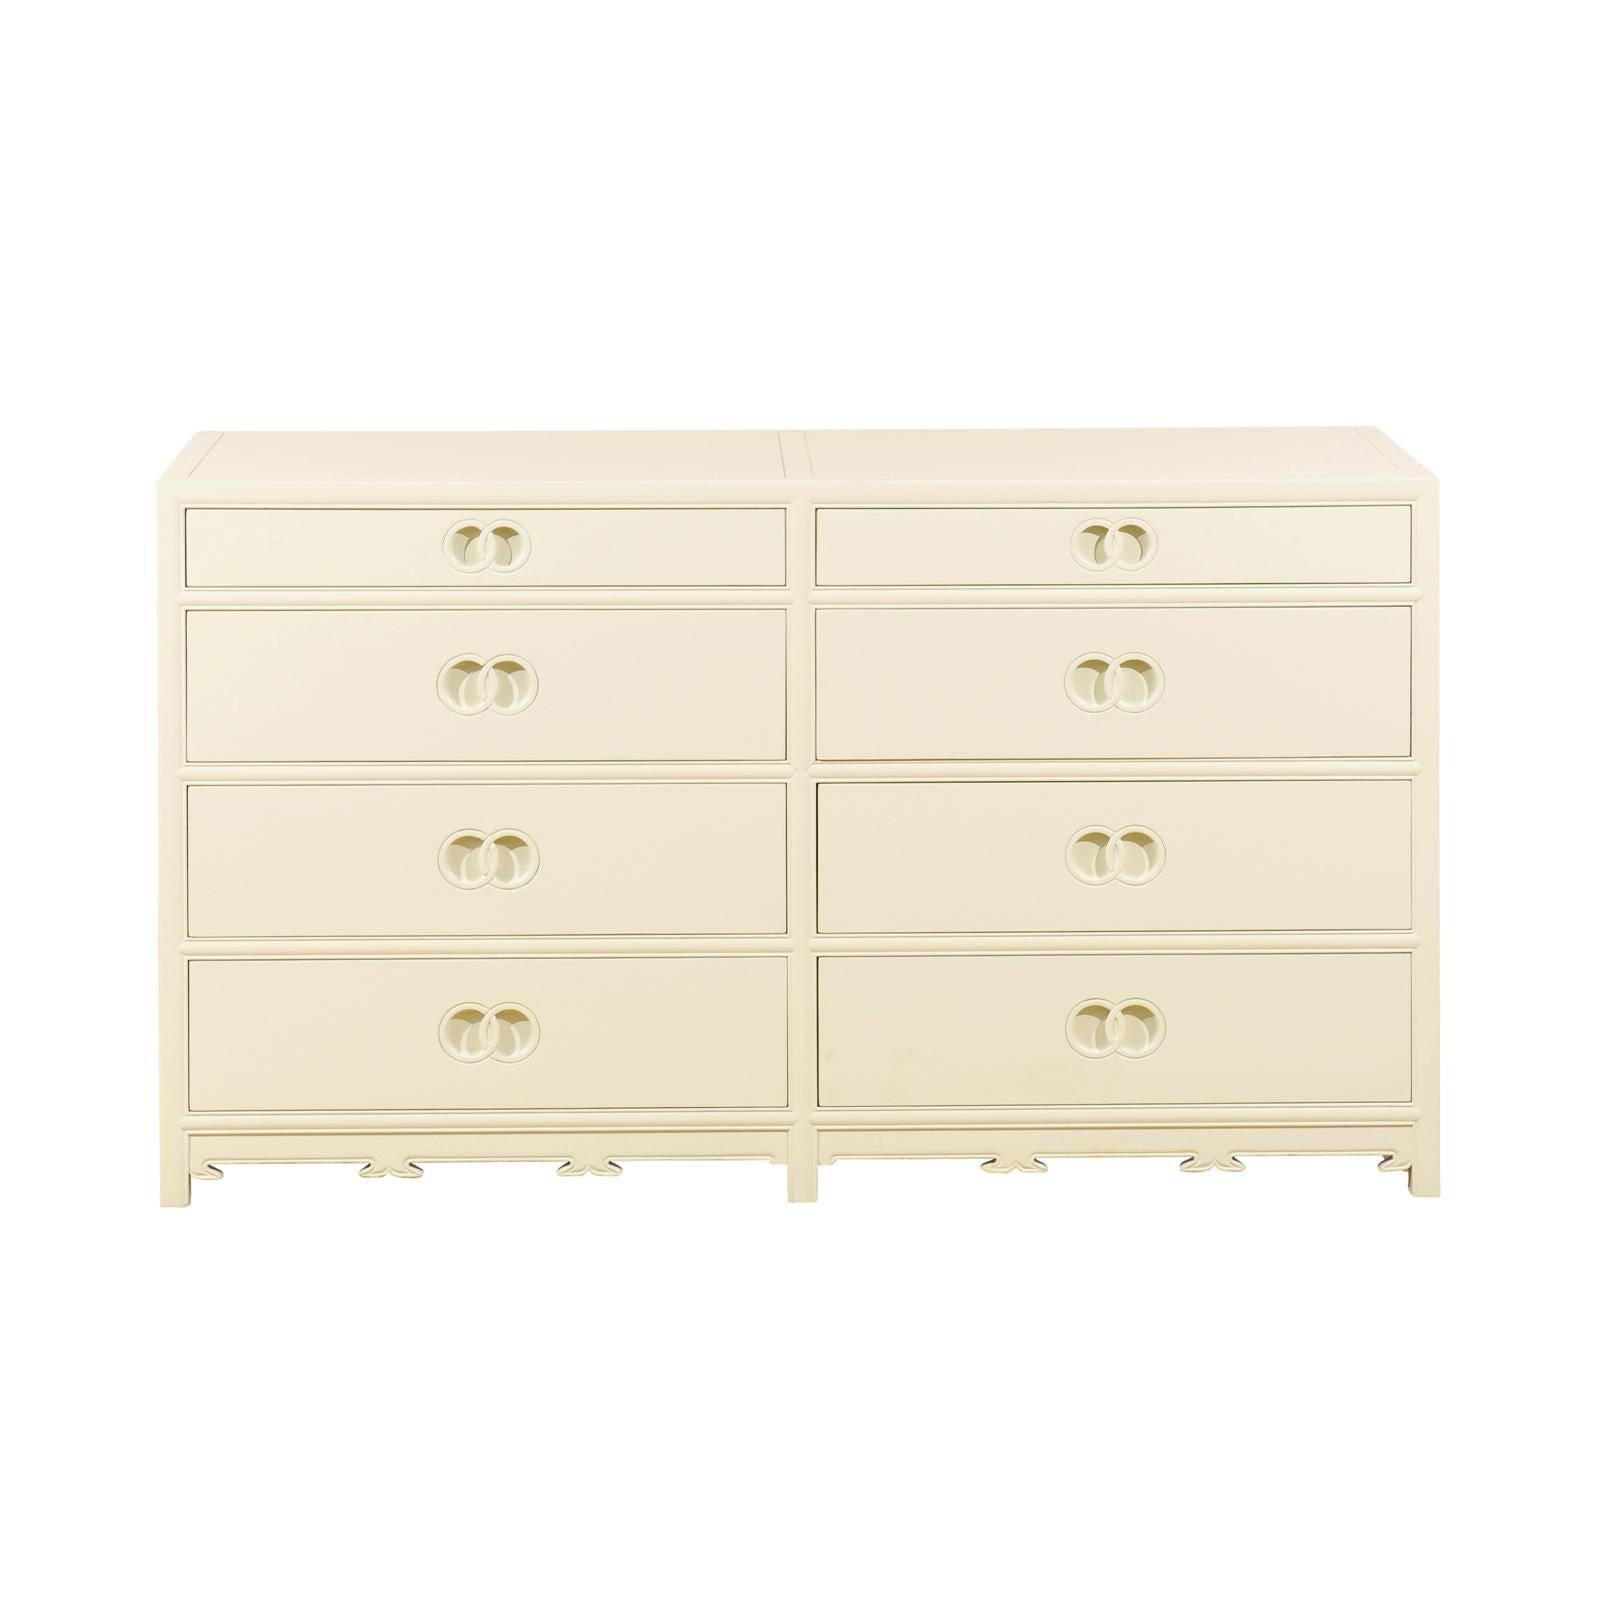 Stellar Restored Eight-Drawer Chest by Baker in Cream Lacquer, circa 1970 For Sale